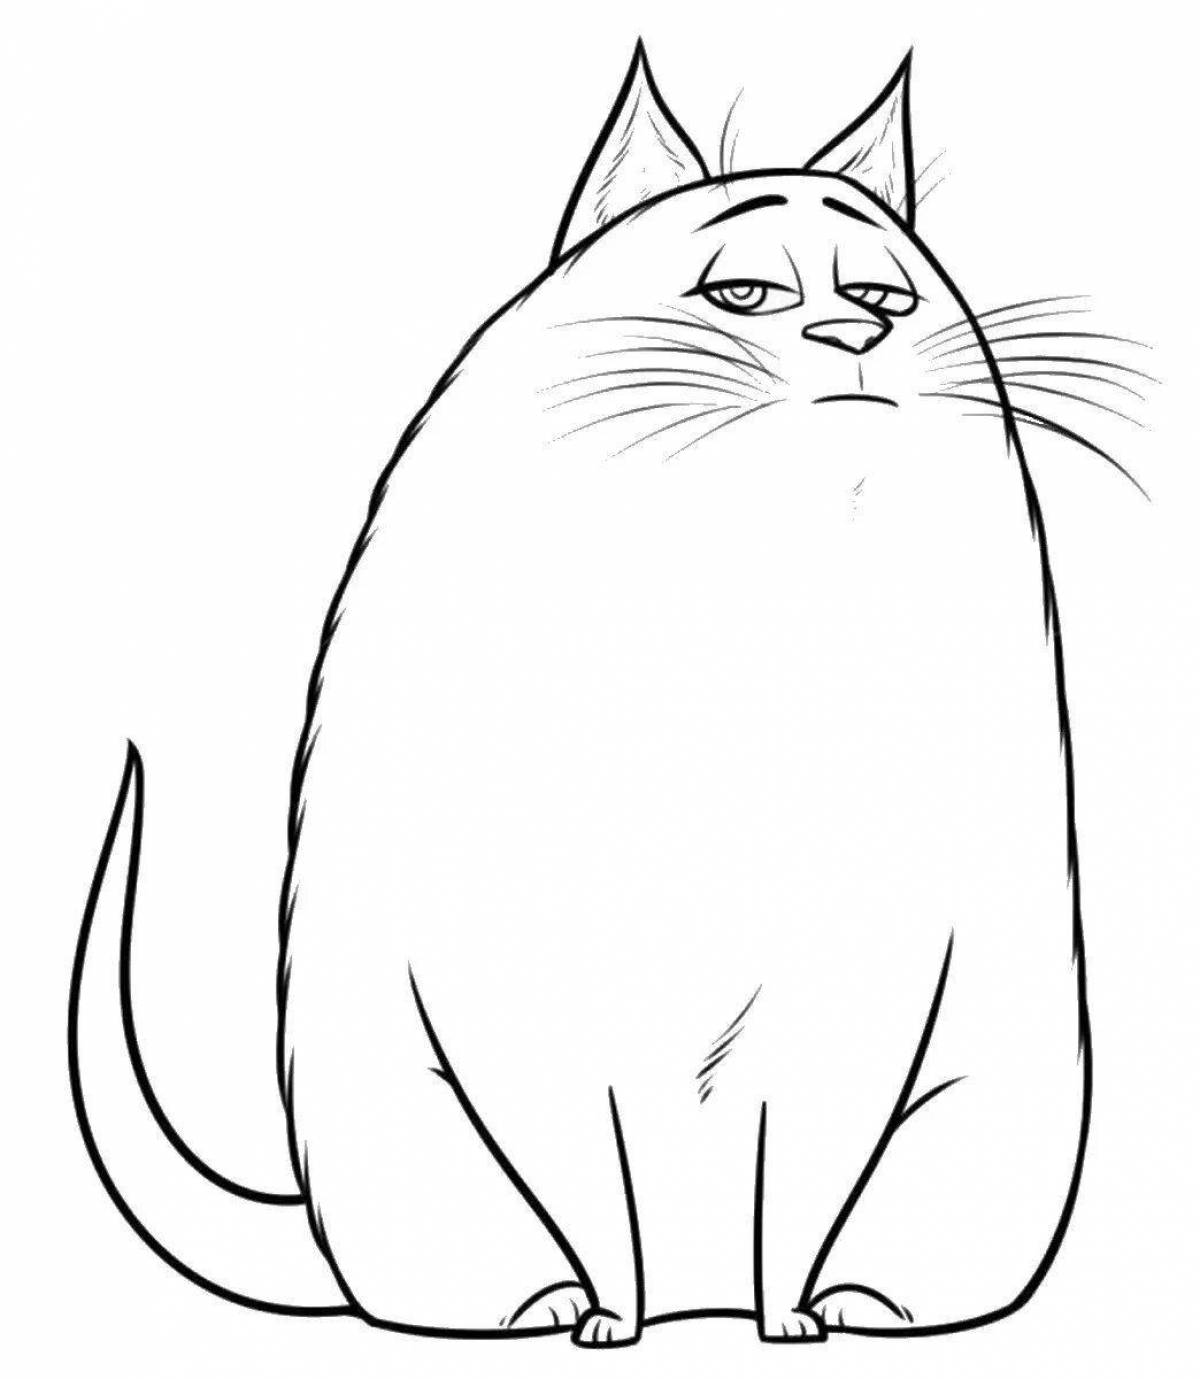 Happy lung seal coloring page